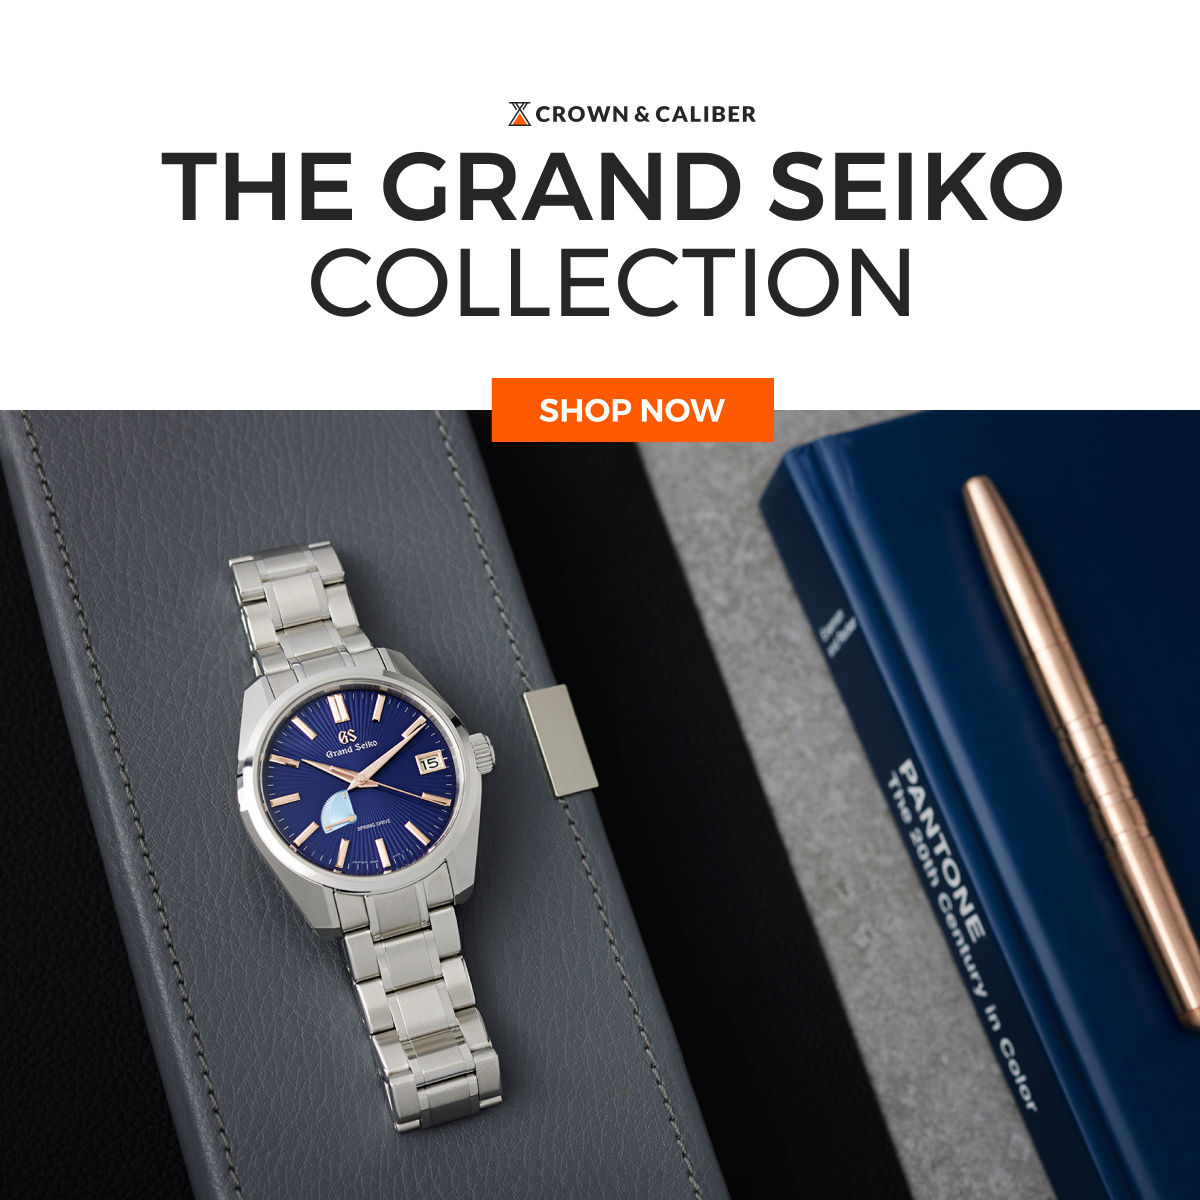 The Grand Seiko Collection + 0% Financing - Crown & Caliber Email Archive